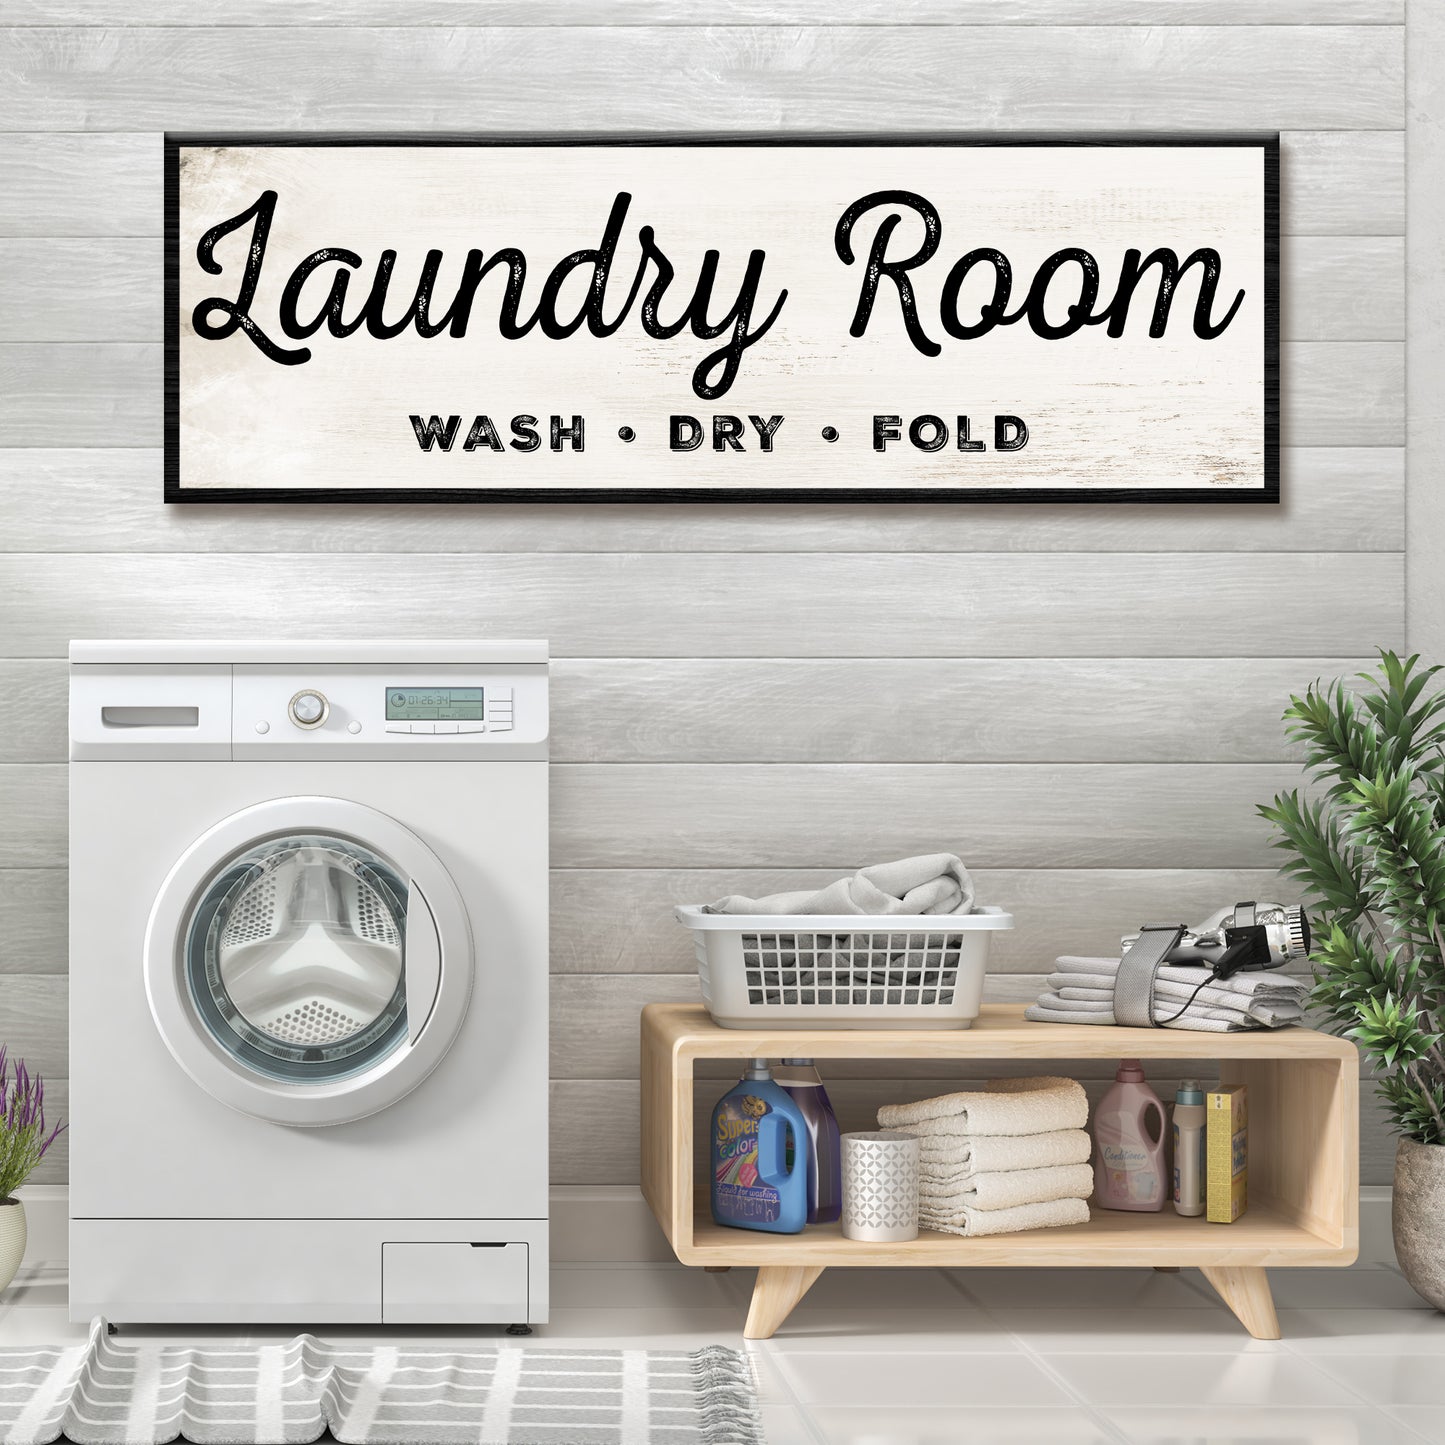 Laundry Room Wash Dry Fold Sign - Image by Tailored Canvases